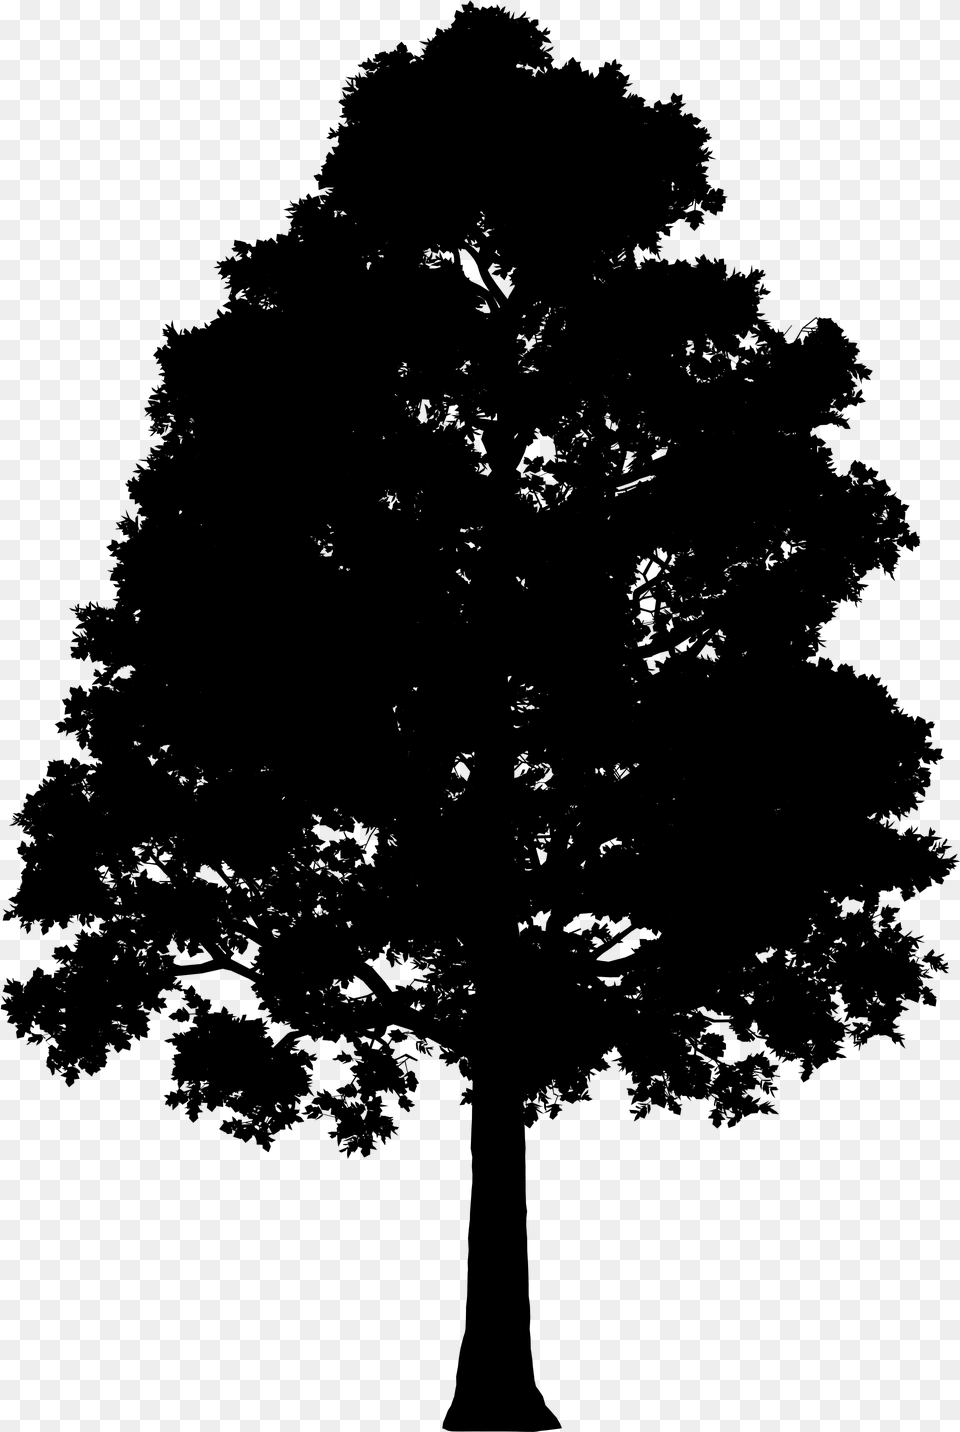 Fir Spruce Silhouette Leaf Big Tree Silhouette, Gray Png